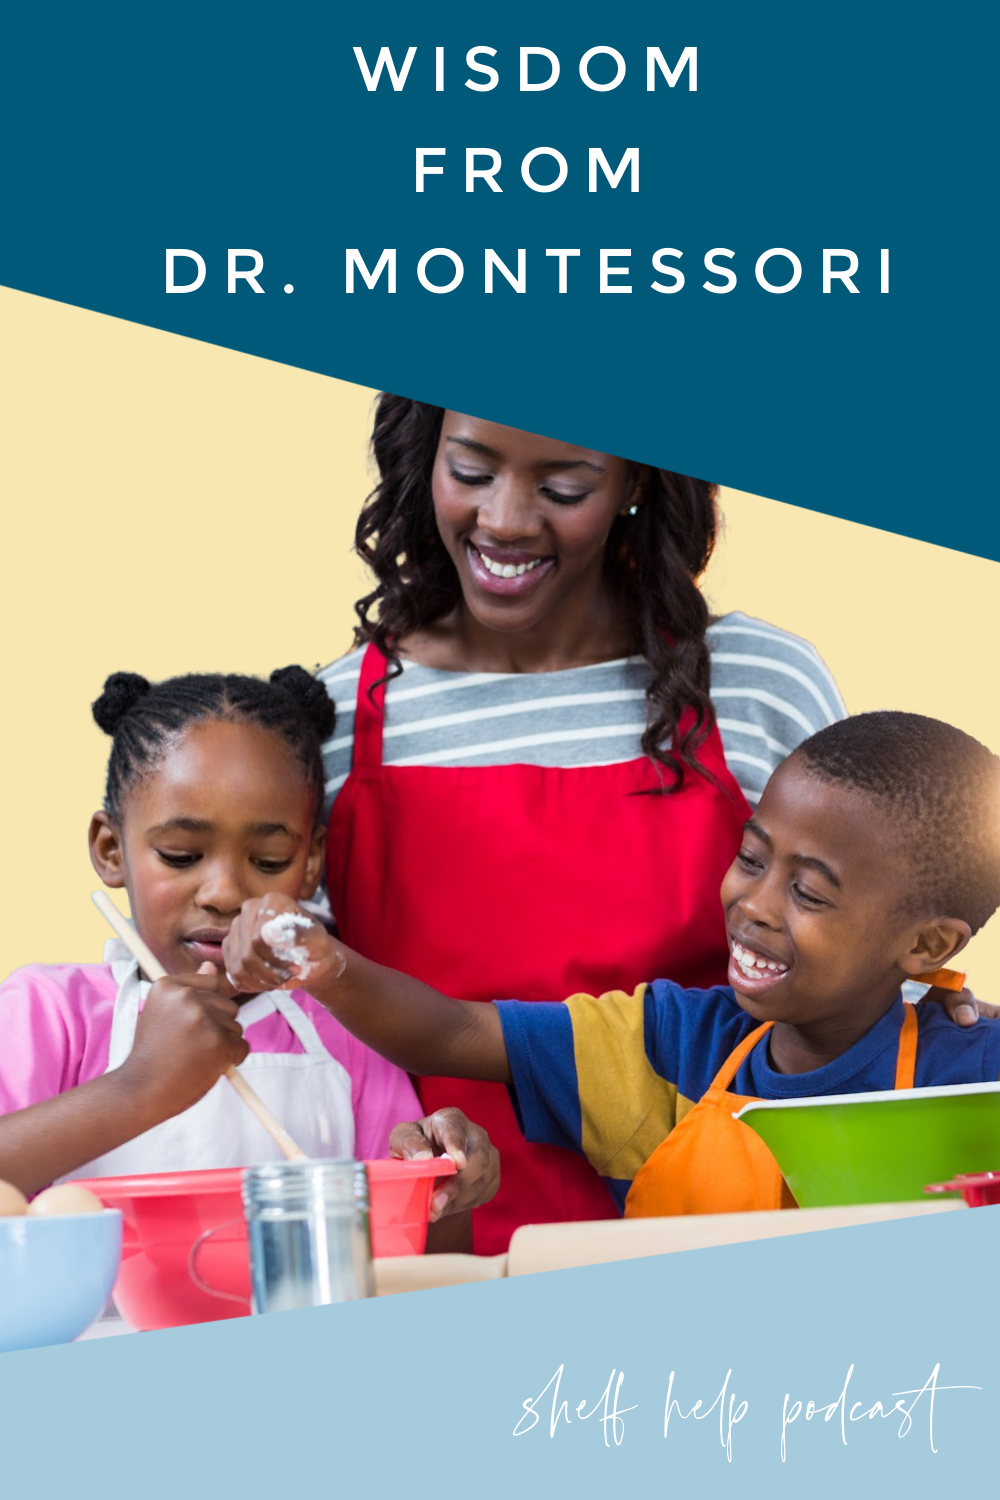 In this Montessori parenting podcast, we discuss some quotes from Dr. Montessori and how these quotes apply to our parenting in 2022.